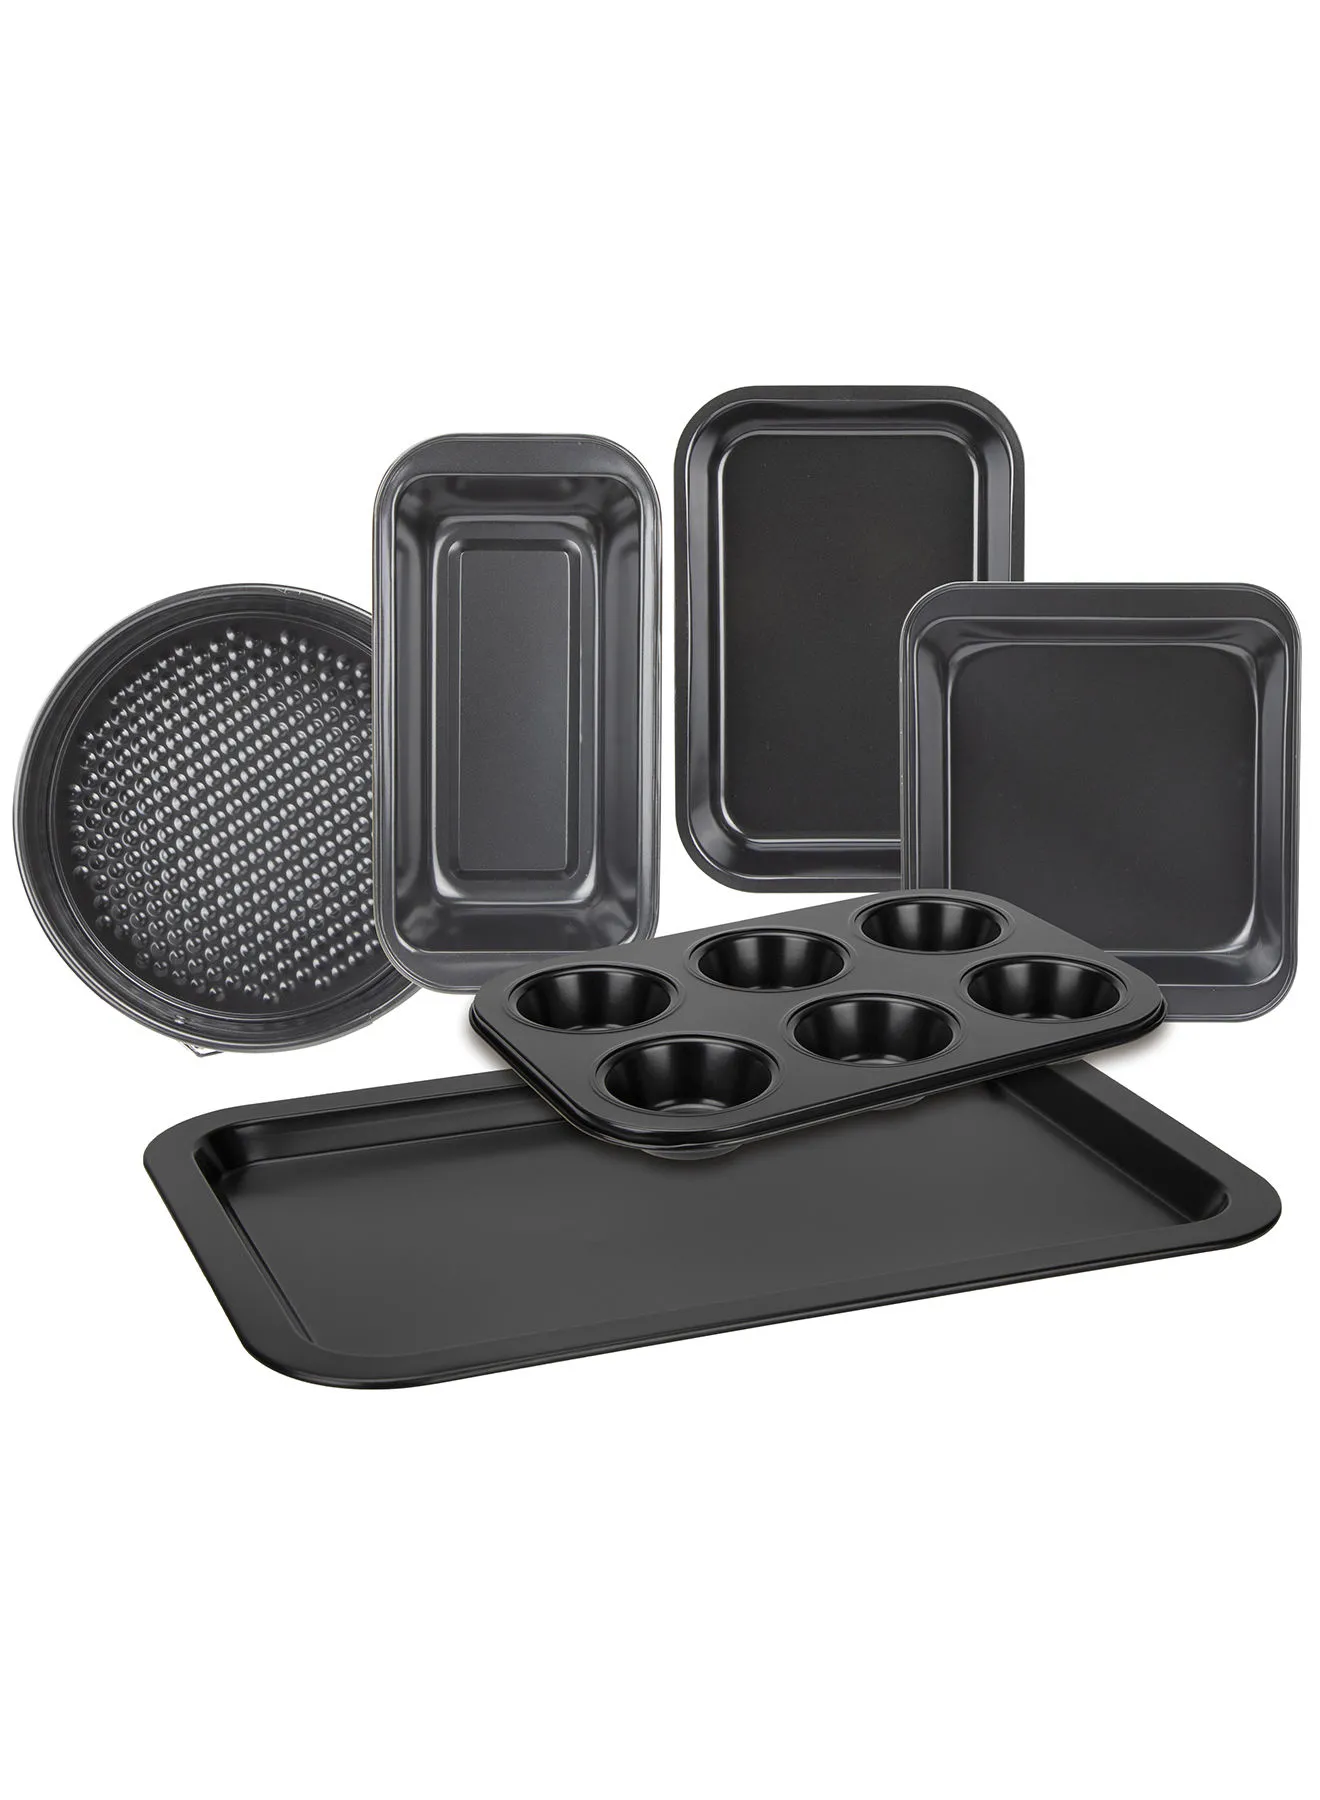 noon east 6 Piece Oven Pan Set - Made Of Carbon Steel - Baking Pan - Oven Trays - Cake Tray - Oven Pan - Cake Mold - Black